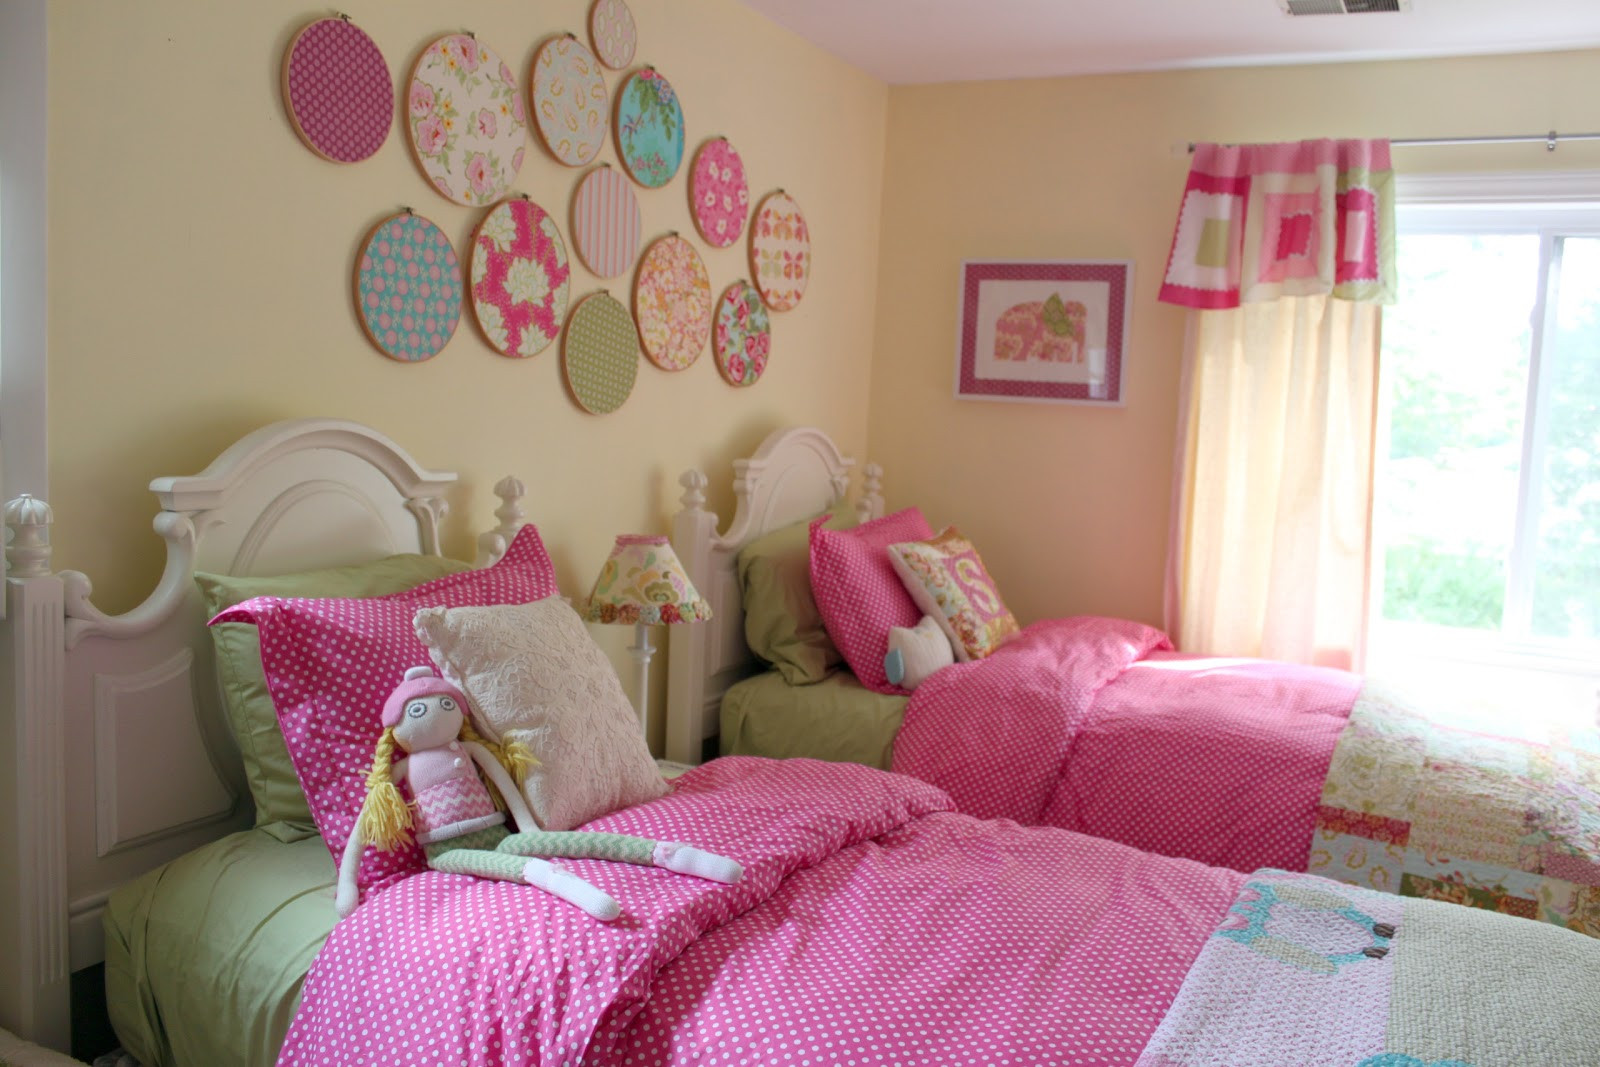 DIY Room Decor Ideas For Girls
 Decorating Girls d Toddler Bedroom The Cottage Mama